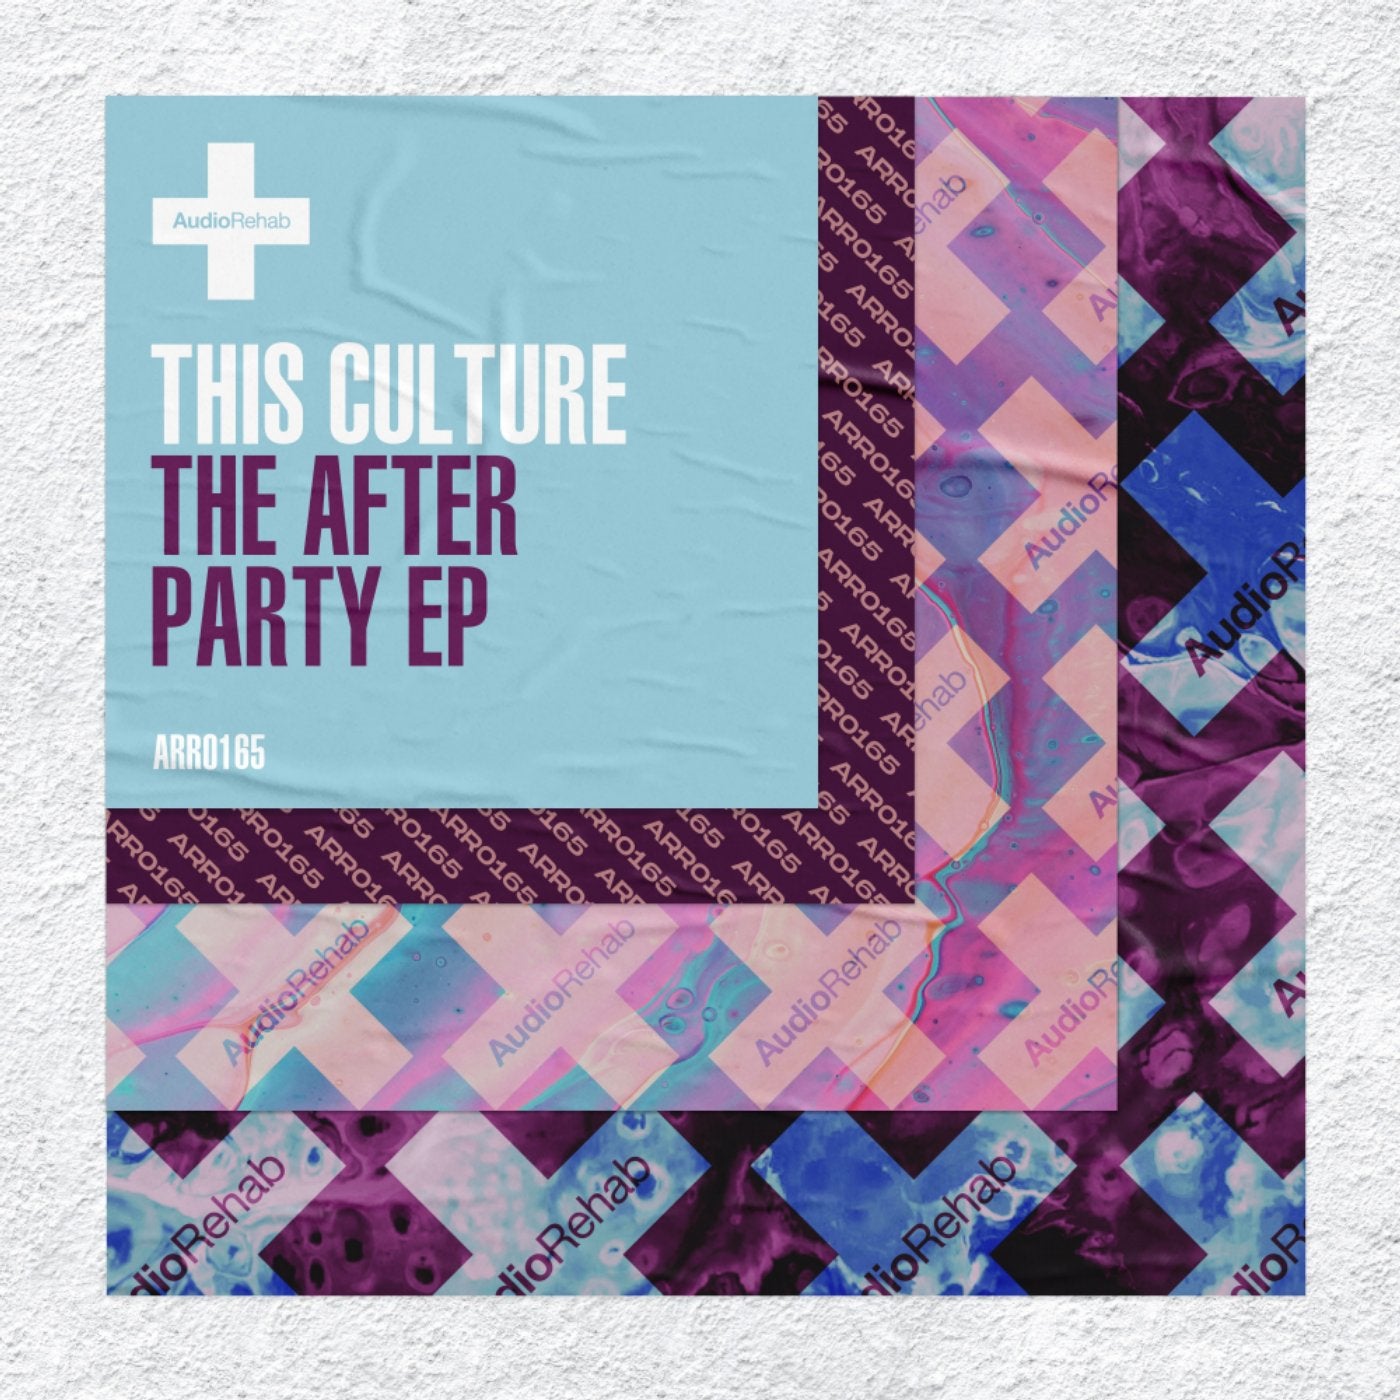 The After Party EP